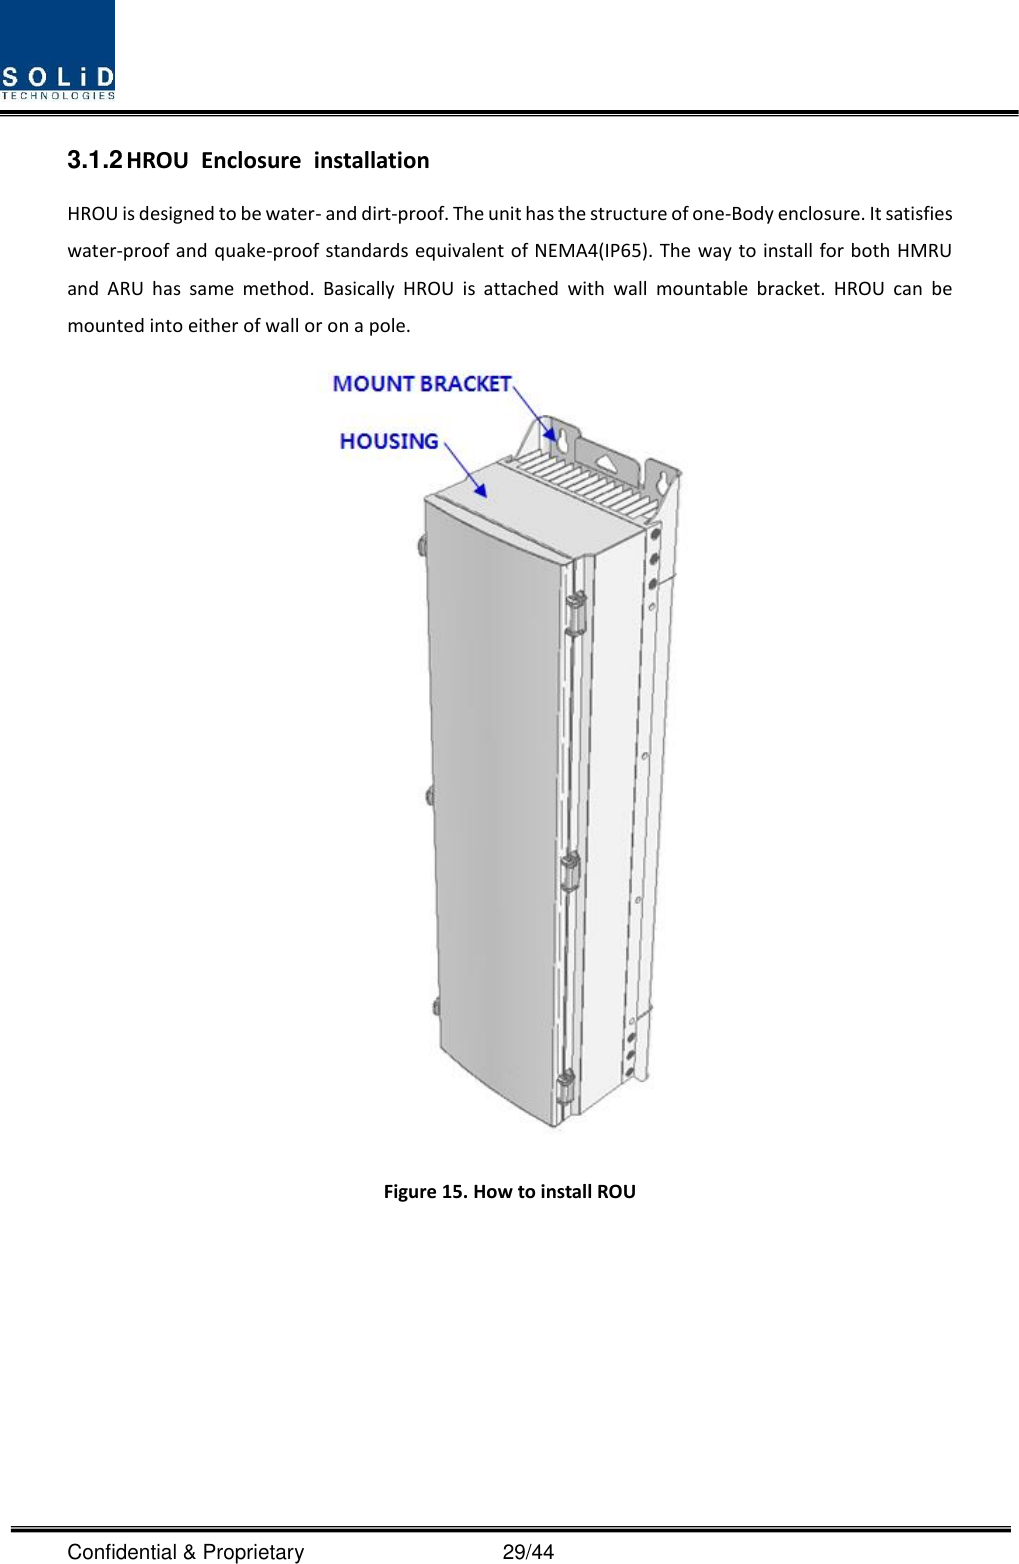  Confidential &amp; Proprietary                                      29/44 3.1.2 HROU  Enclosure  installation HROU is designed to be water- and dirt-proof. The unit has the structure of one-Body enclosure. It satisfies water-proof and quake-proof standards equivalent of NEMA4(IP65). The way to install for both HMRU and  ARU  has  same  method.  Basically  HROU  is  attached  with  wall  mountable  bracket.  HROU  can  be mounted into either of wall or on a pole.    Figure 15. How to install ROU     